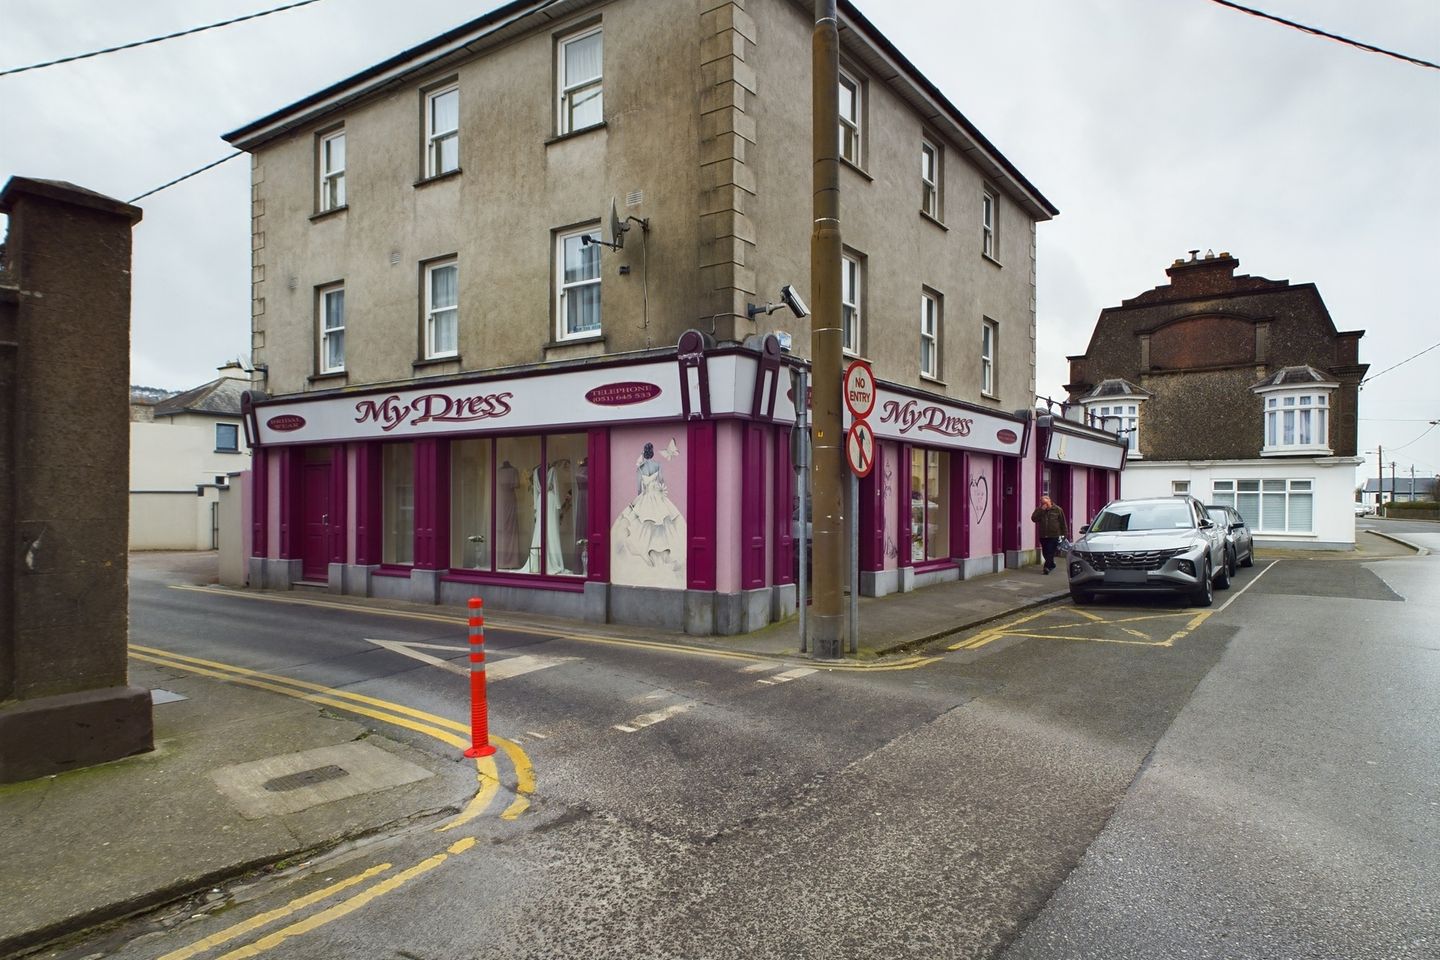 Chapel Street, Carrick-on-Suir, Co. Tipperary